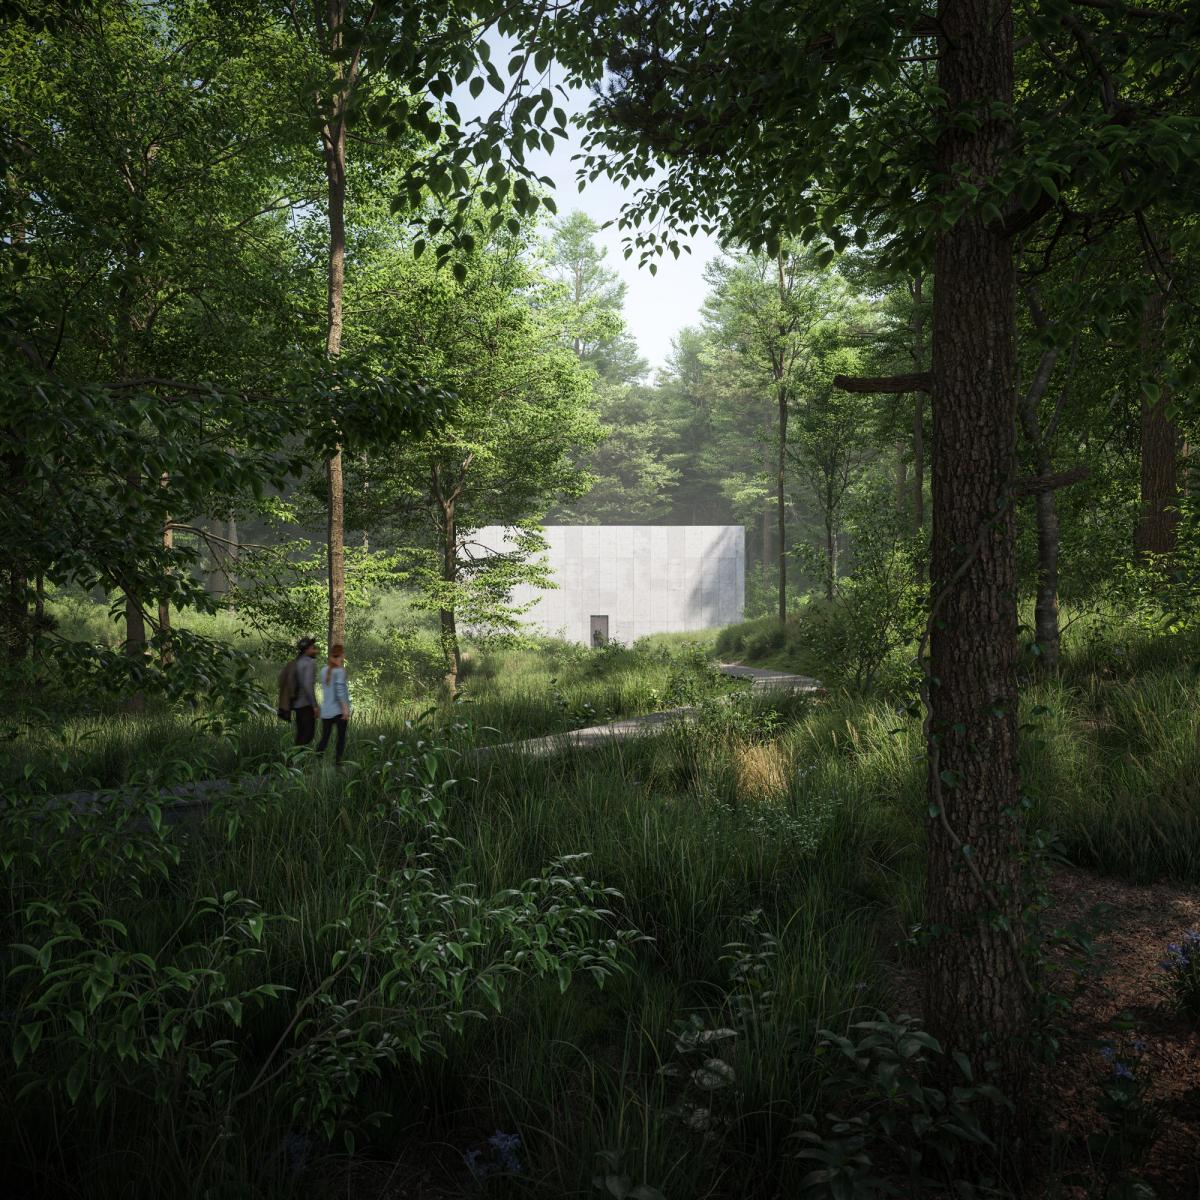 A rendering of the forest approach to the new building at Glenstone Museum Image: The Boundary. Courtesy of Glenstone Museum